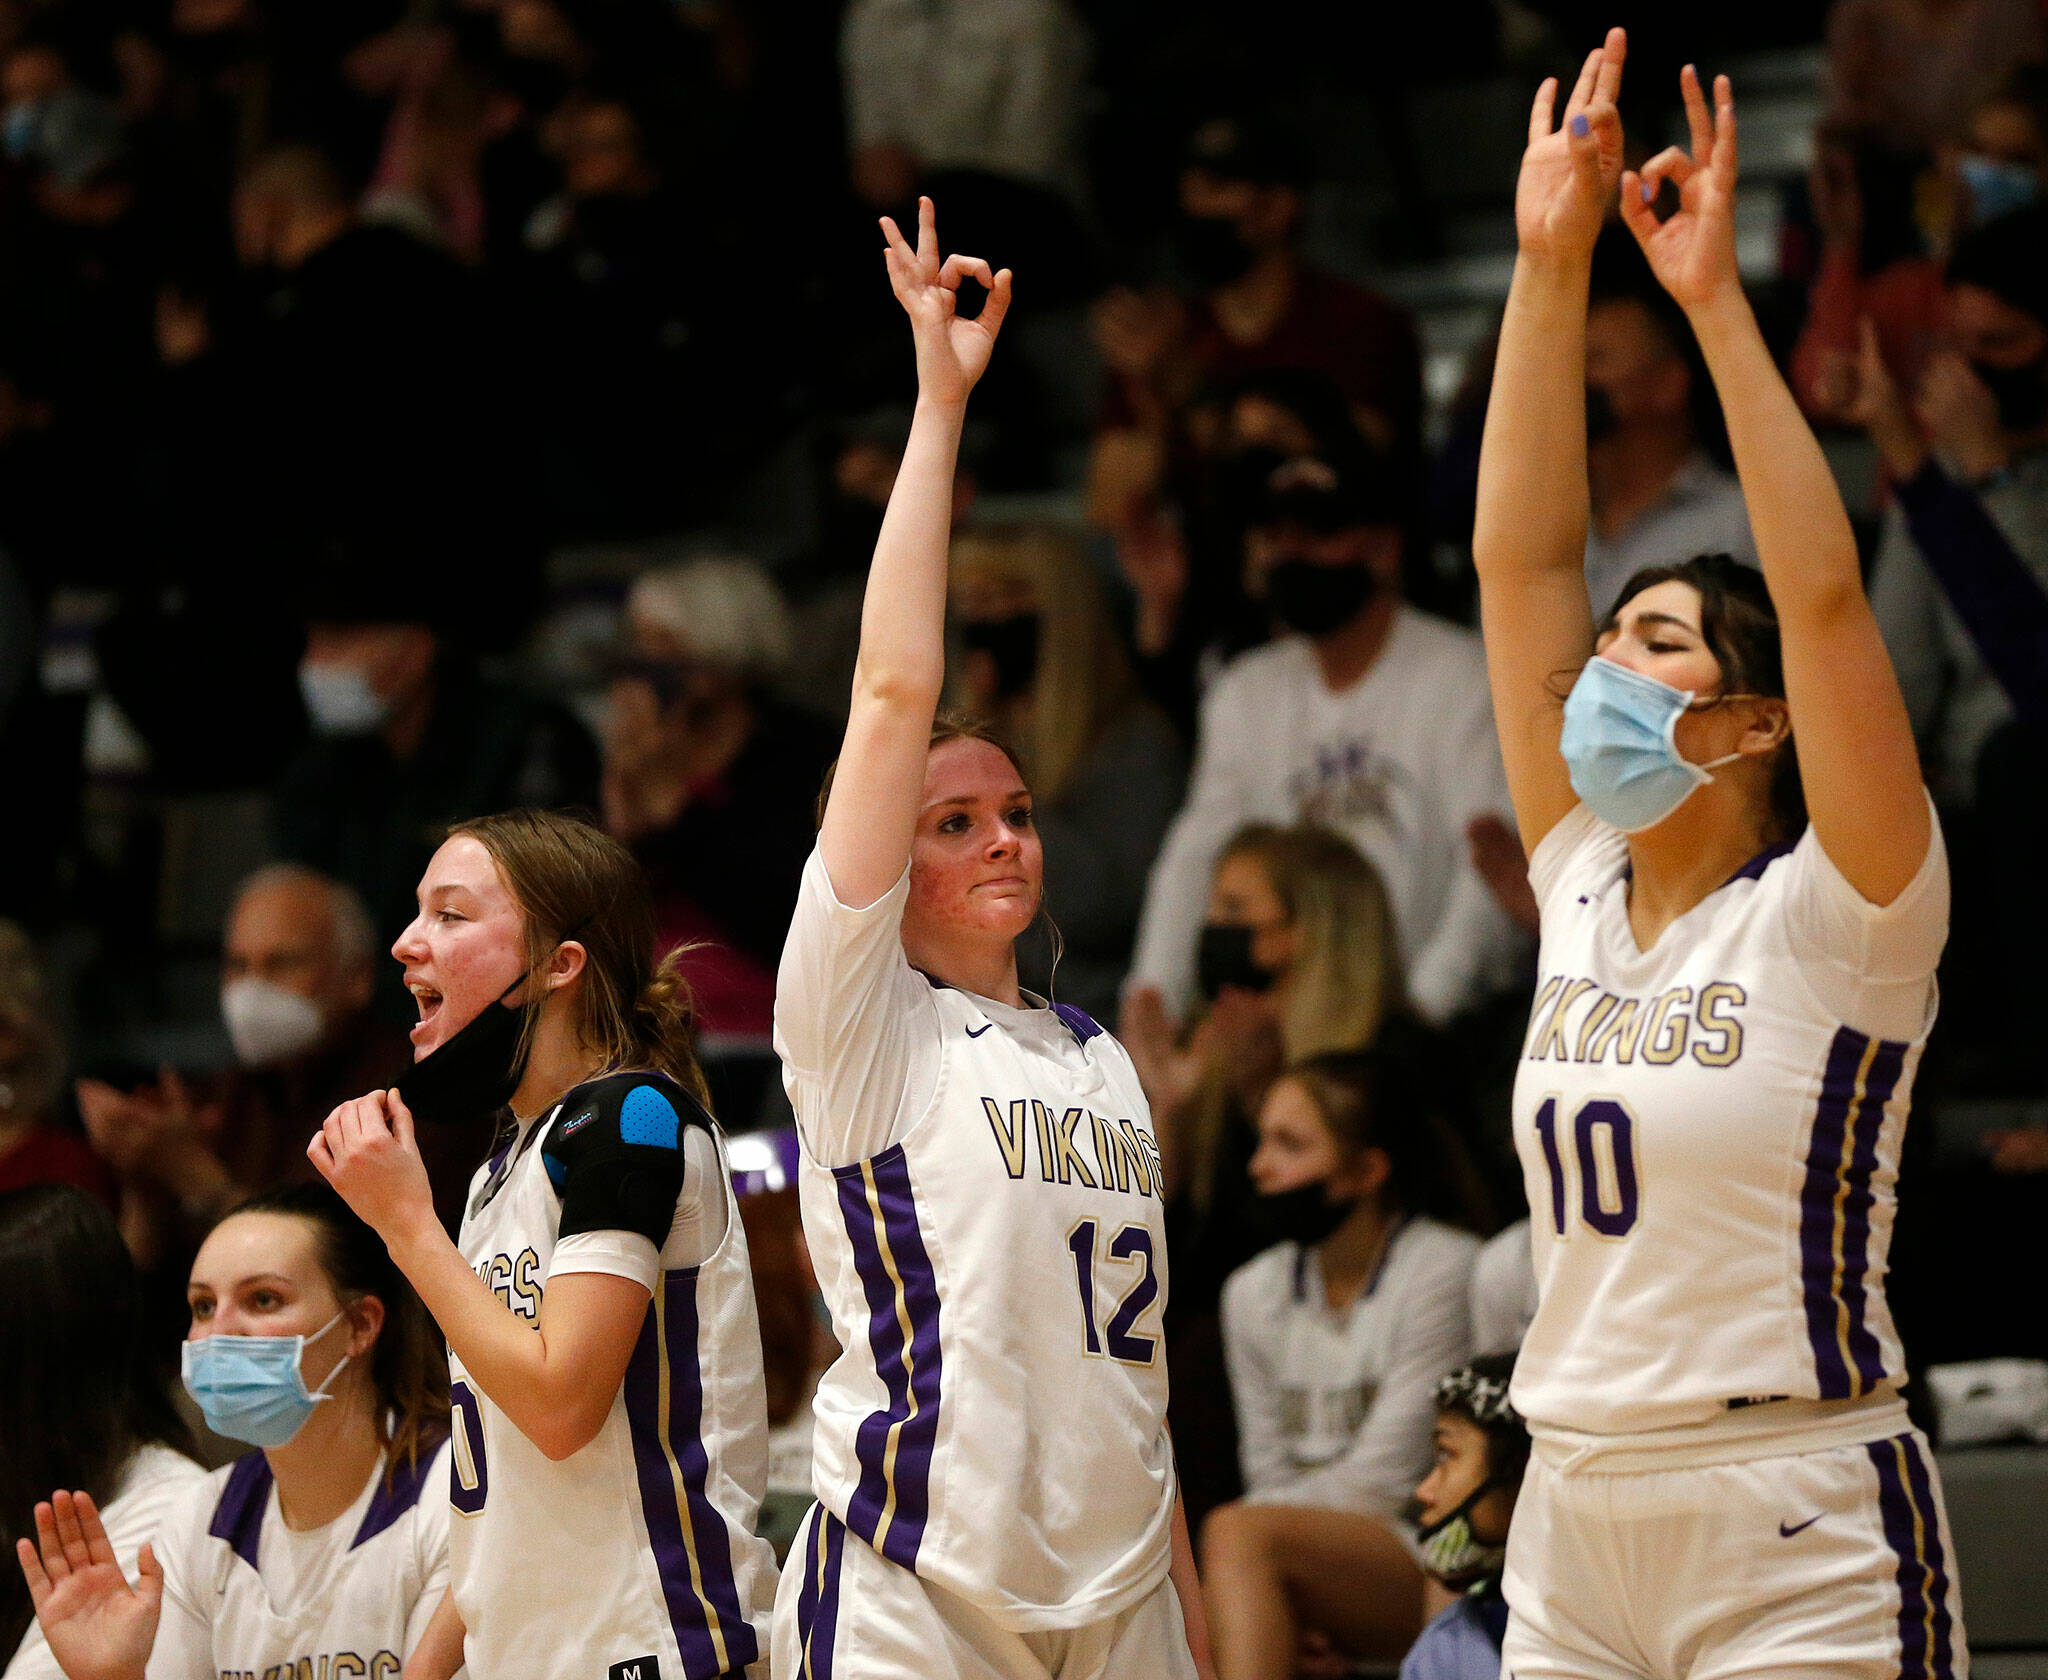 The Lake Stevens bench reacts to a teammate’s 3-point shot during a game against Kamiak on Feb. 7, 2022, at Lake Stevens High School. (Ryan Berry / The Herald)